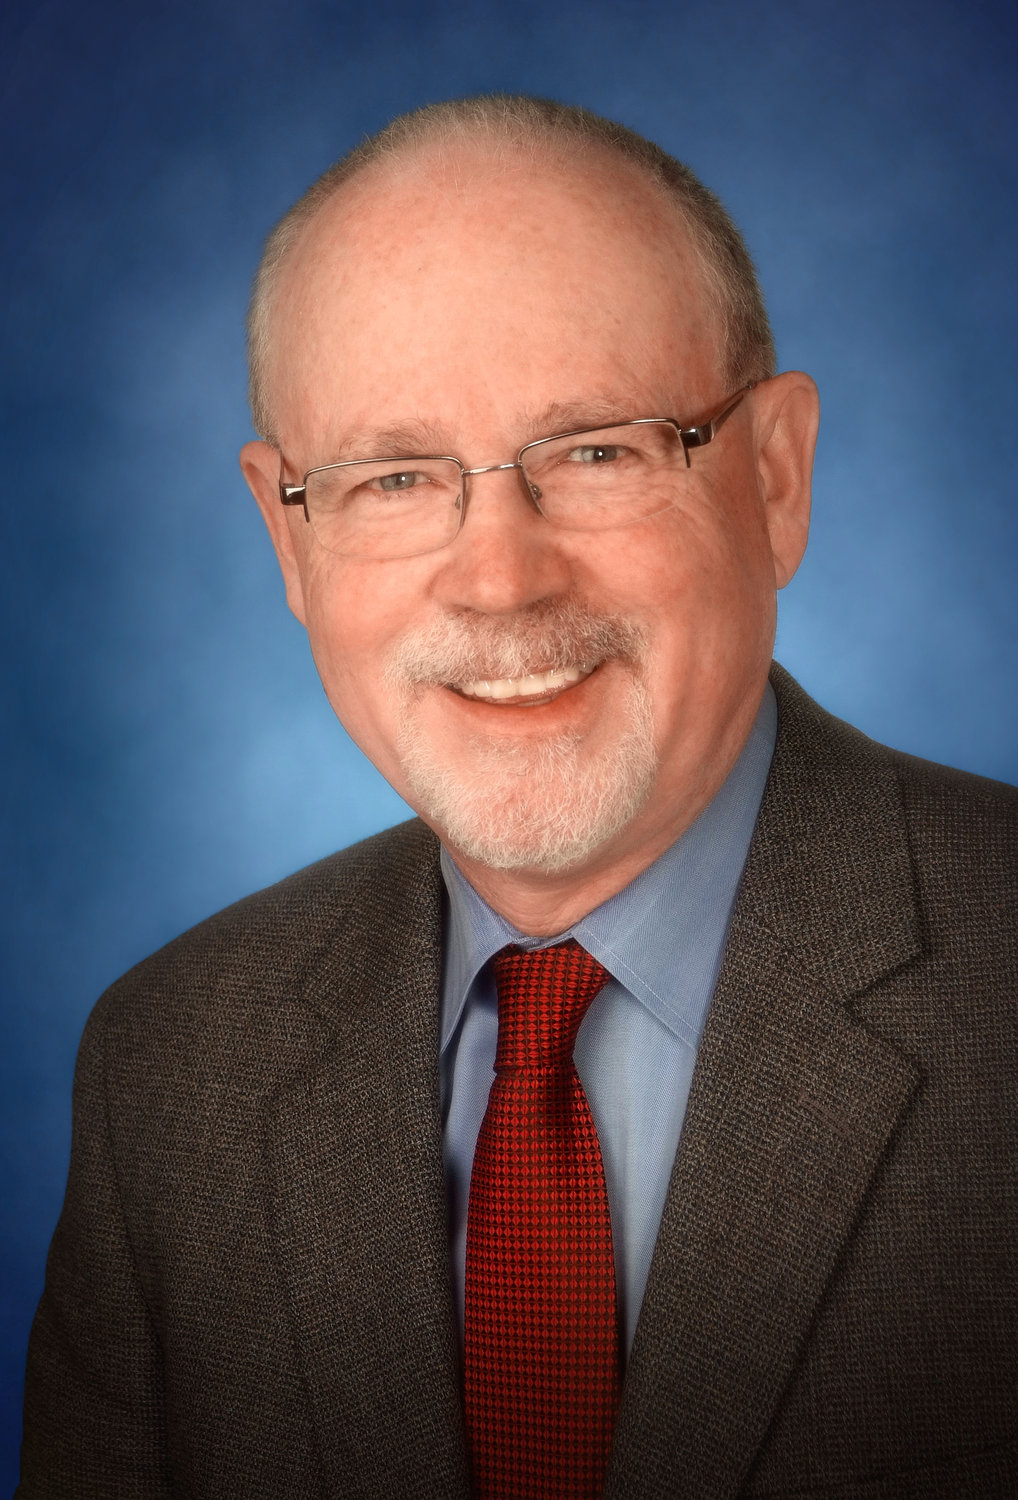 Dr. David Stanfield is assistant director of optometry at Pacific Cataract and Laser Institute in Chehalis and is president-elect of the Optometric Physicians of Washington.